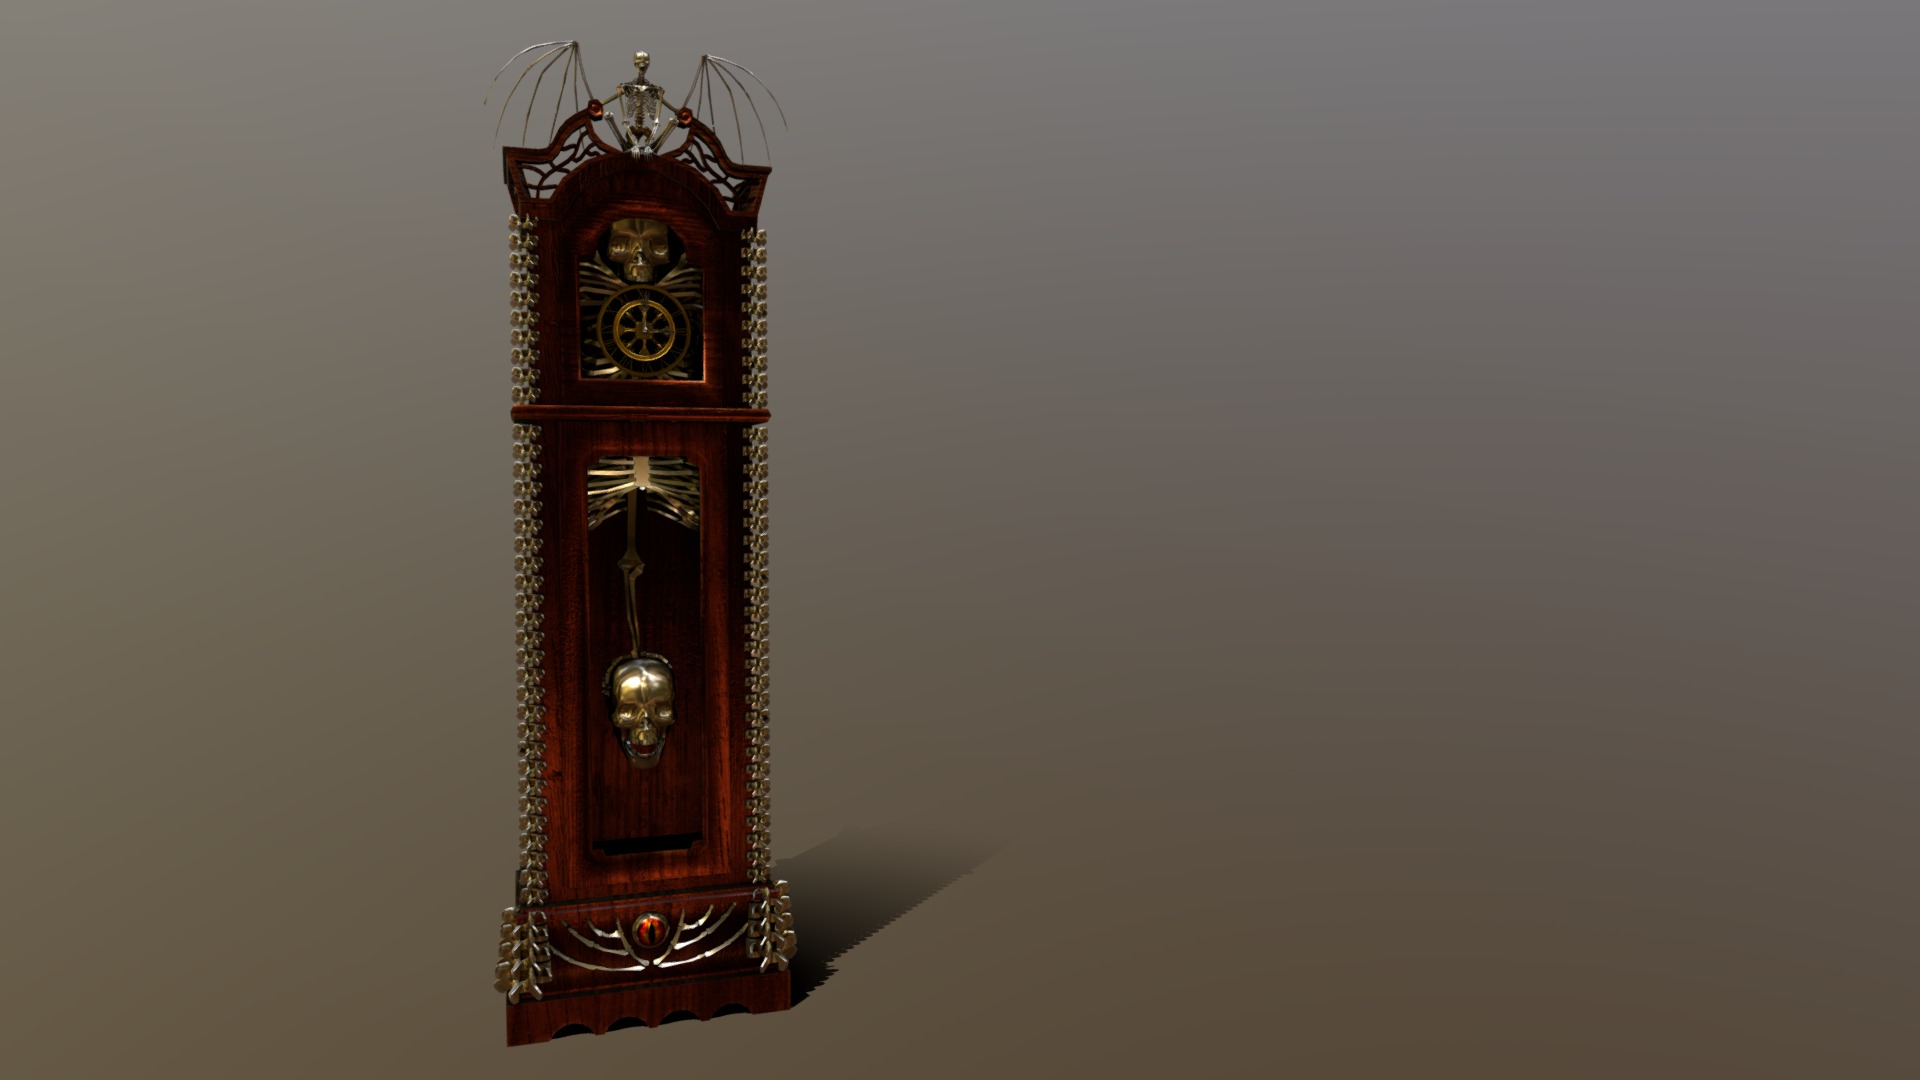 3D model Pirate’s clock - This is a 3D model of the Pirate's clock. The 3D model is about a clock tower with a bell.